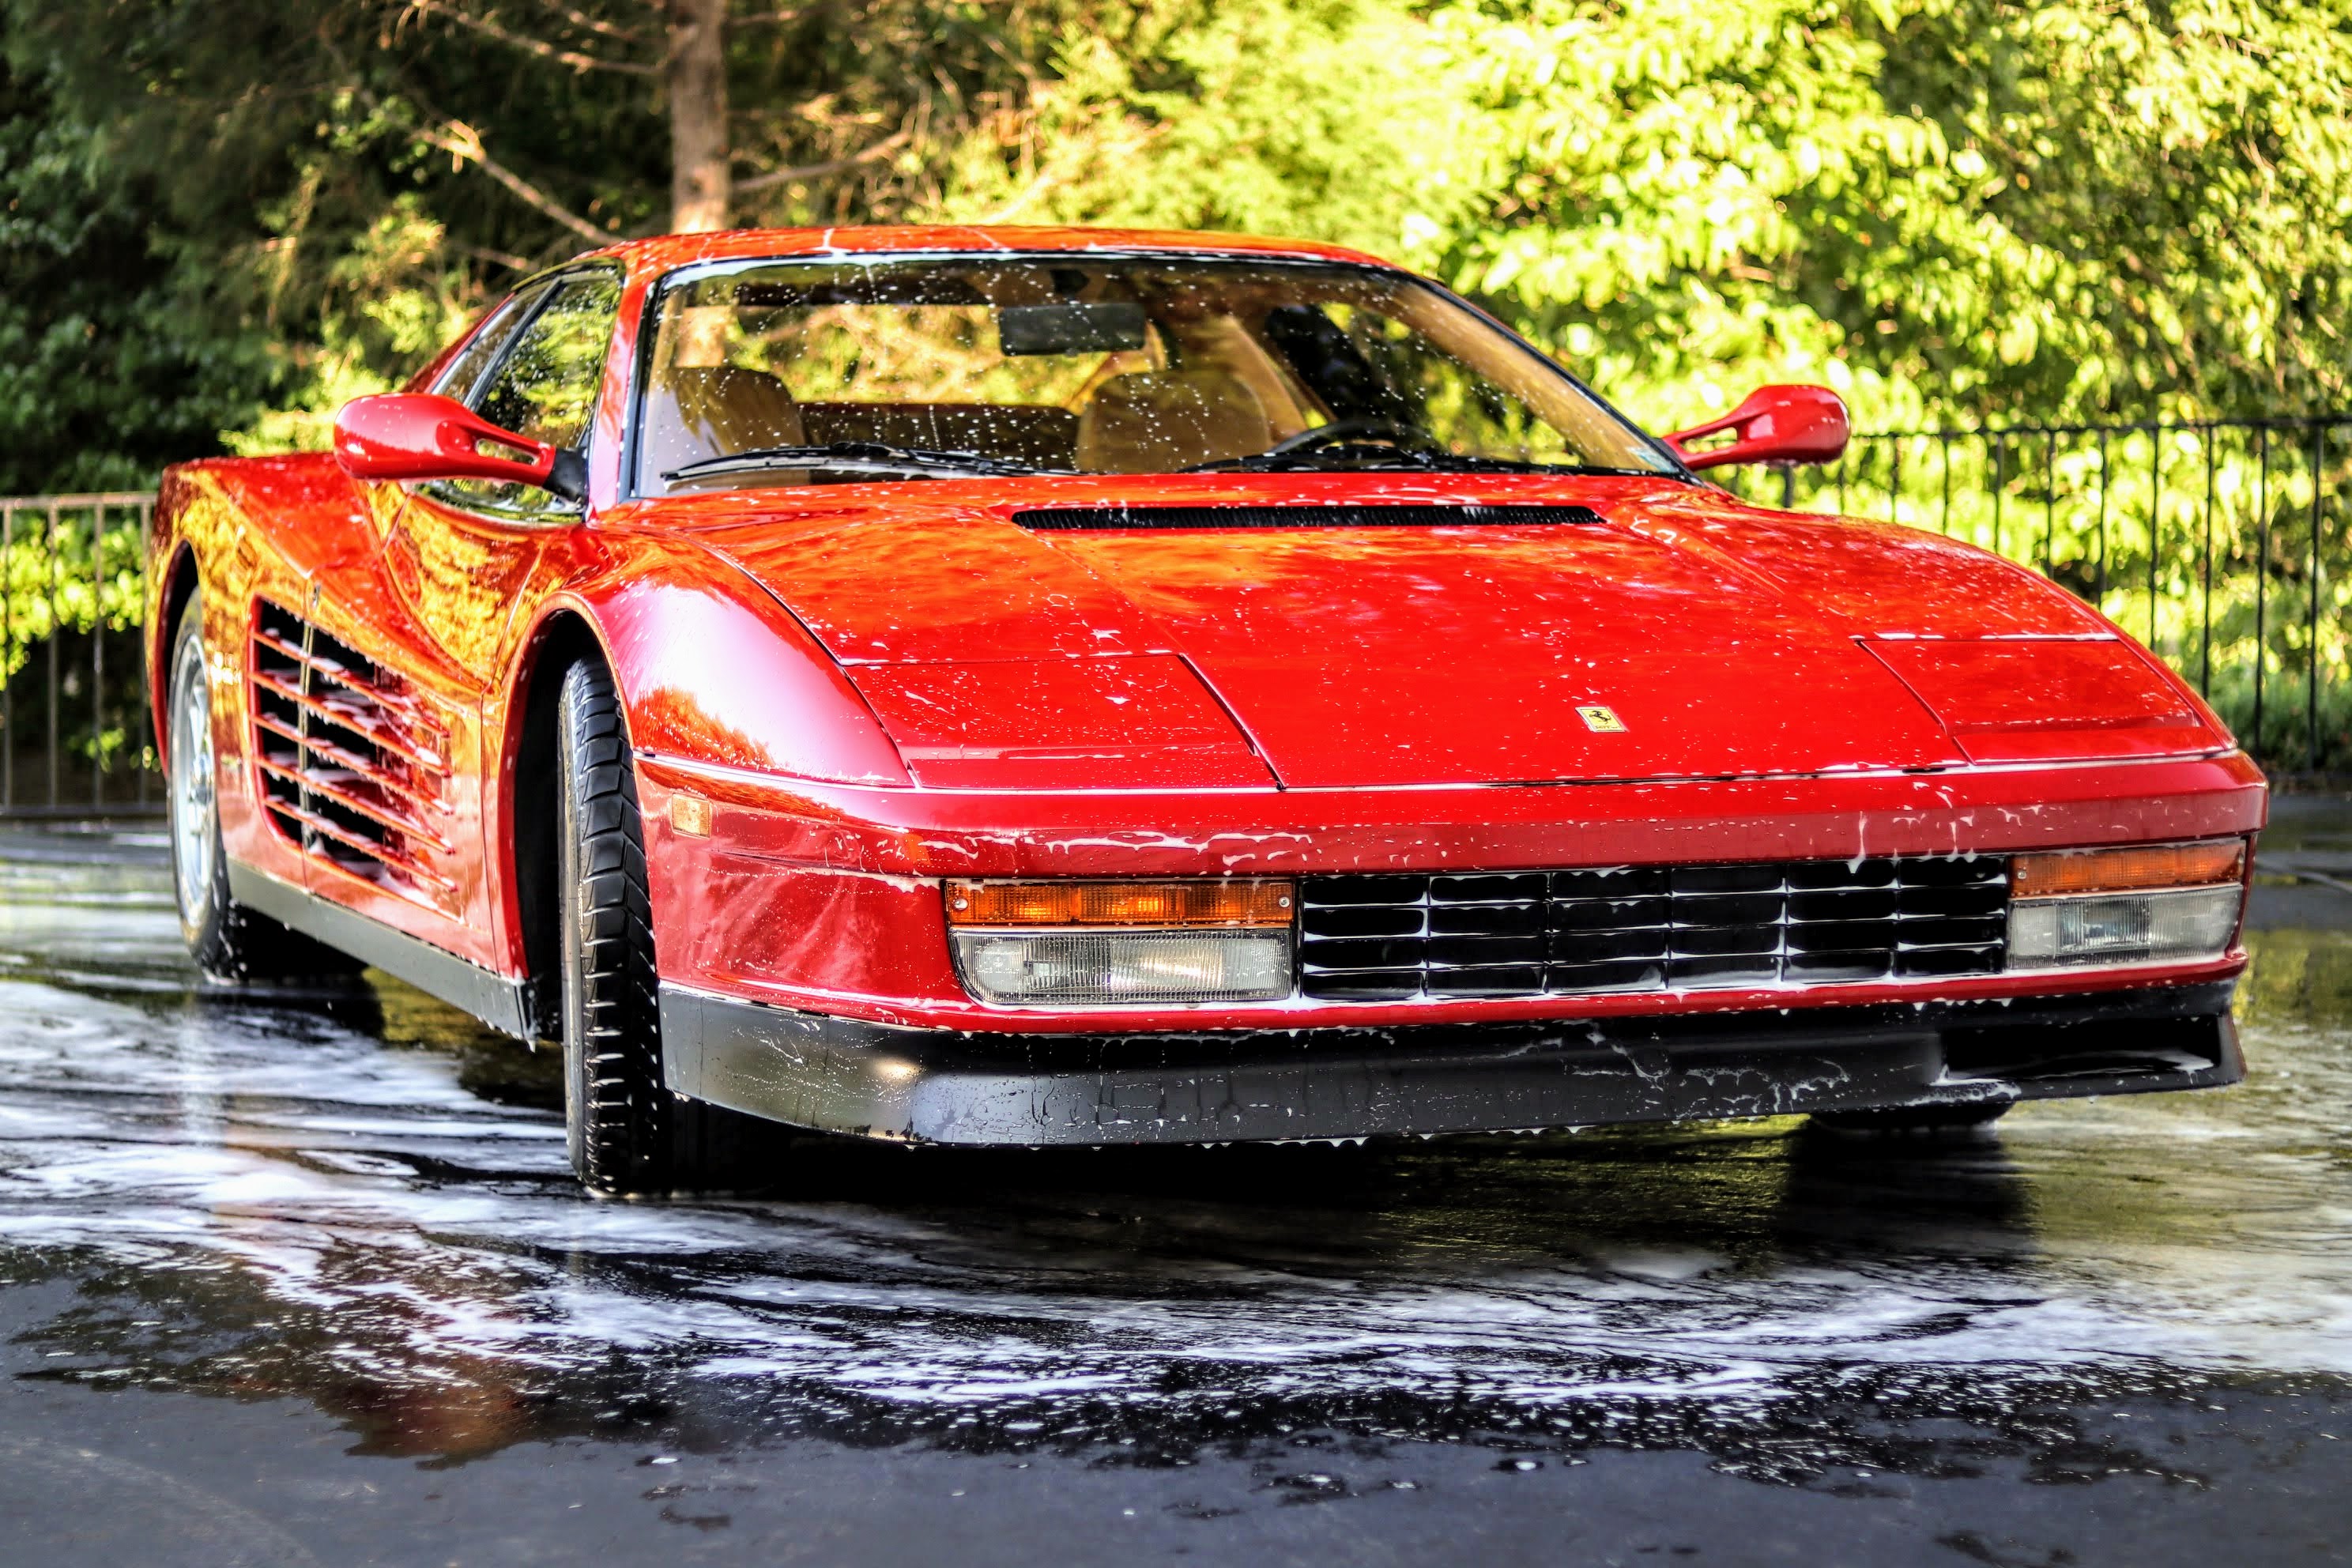 Ferrari Testarossa completely washed with the Microfiber Madness Wash Mitt